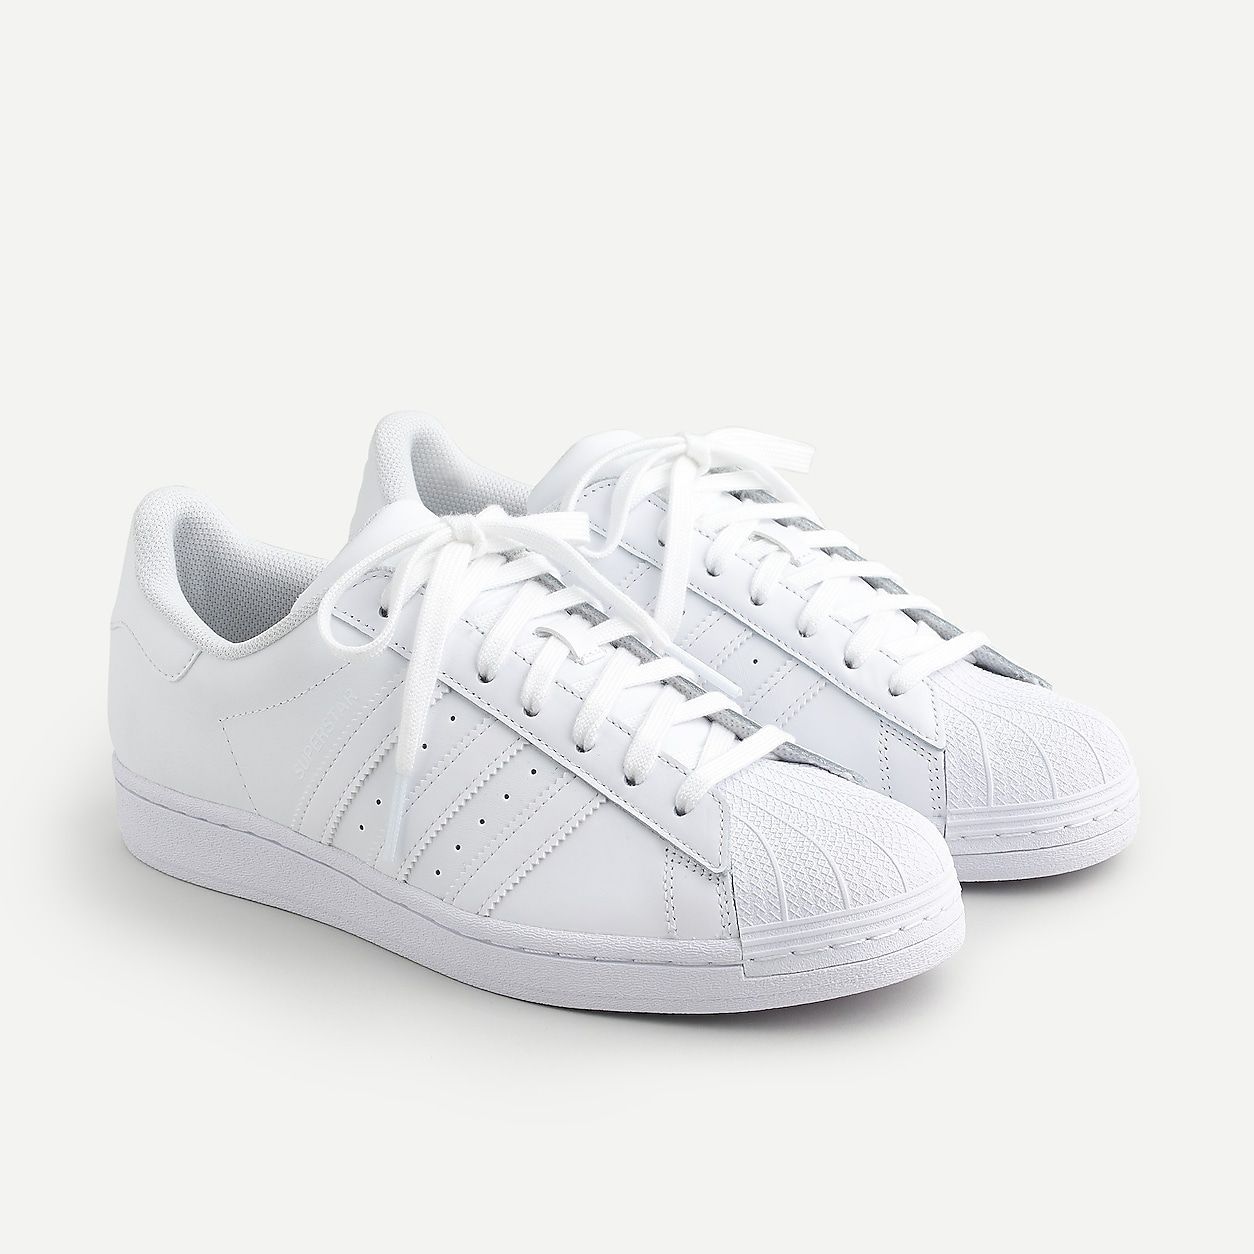 Adidas Superstar Sneakers - Adidas Superstar Sneakers -   18 street style Icons ideas